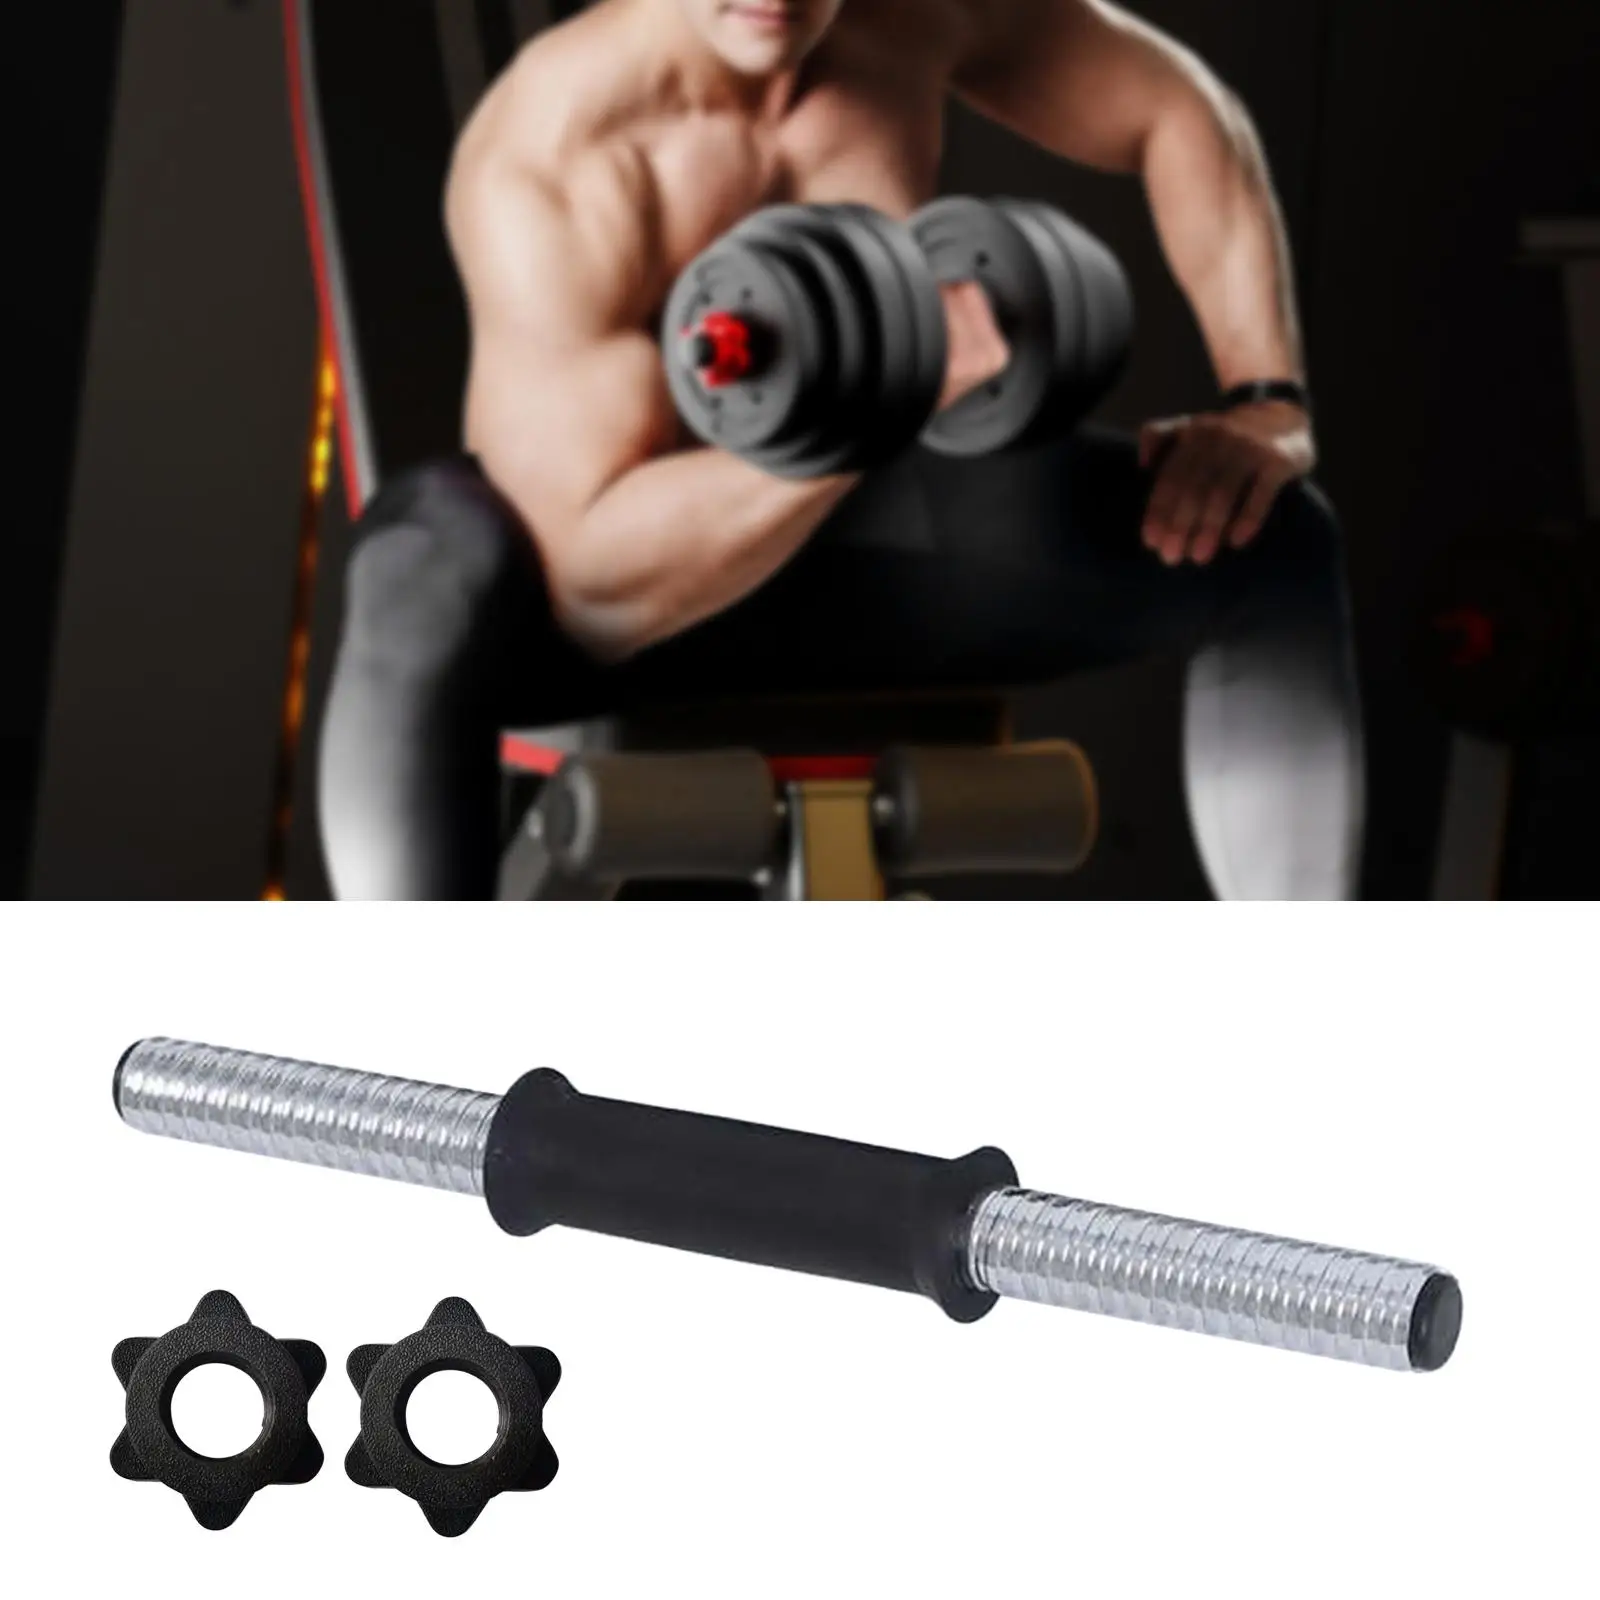 Dumbbell Bar Practical Strength Training for Sport Muscle Building Workout